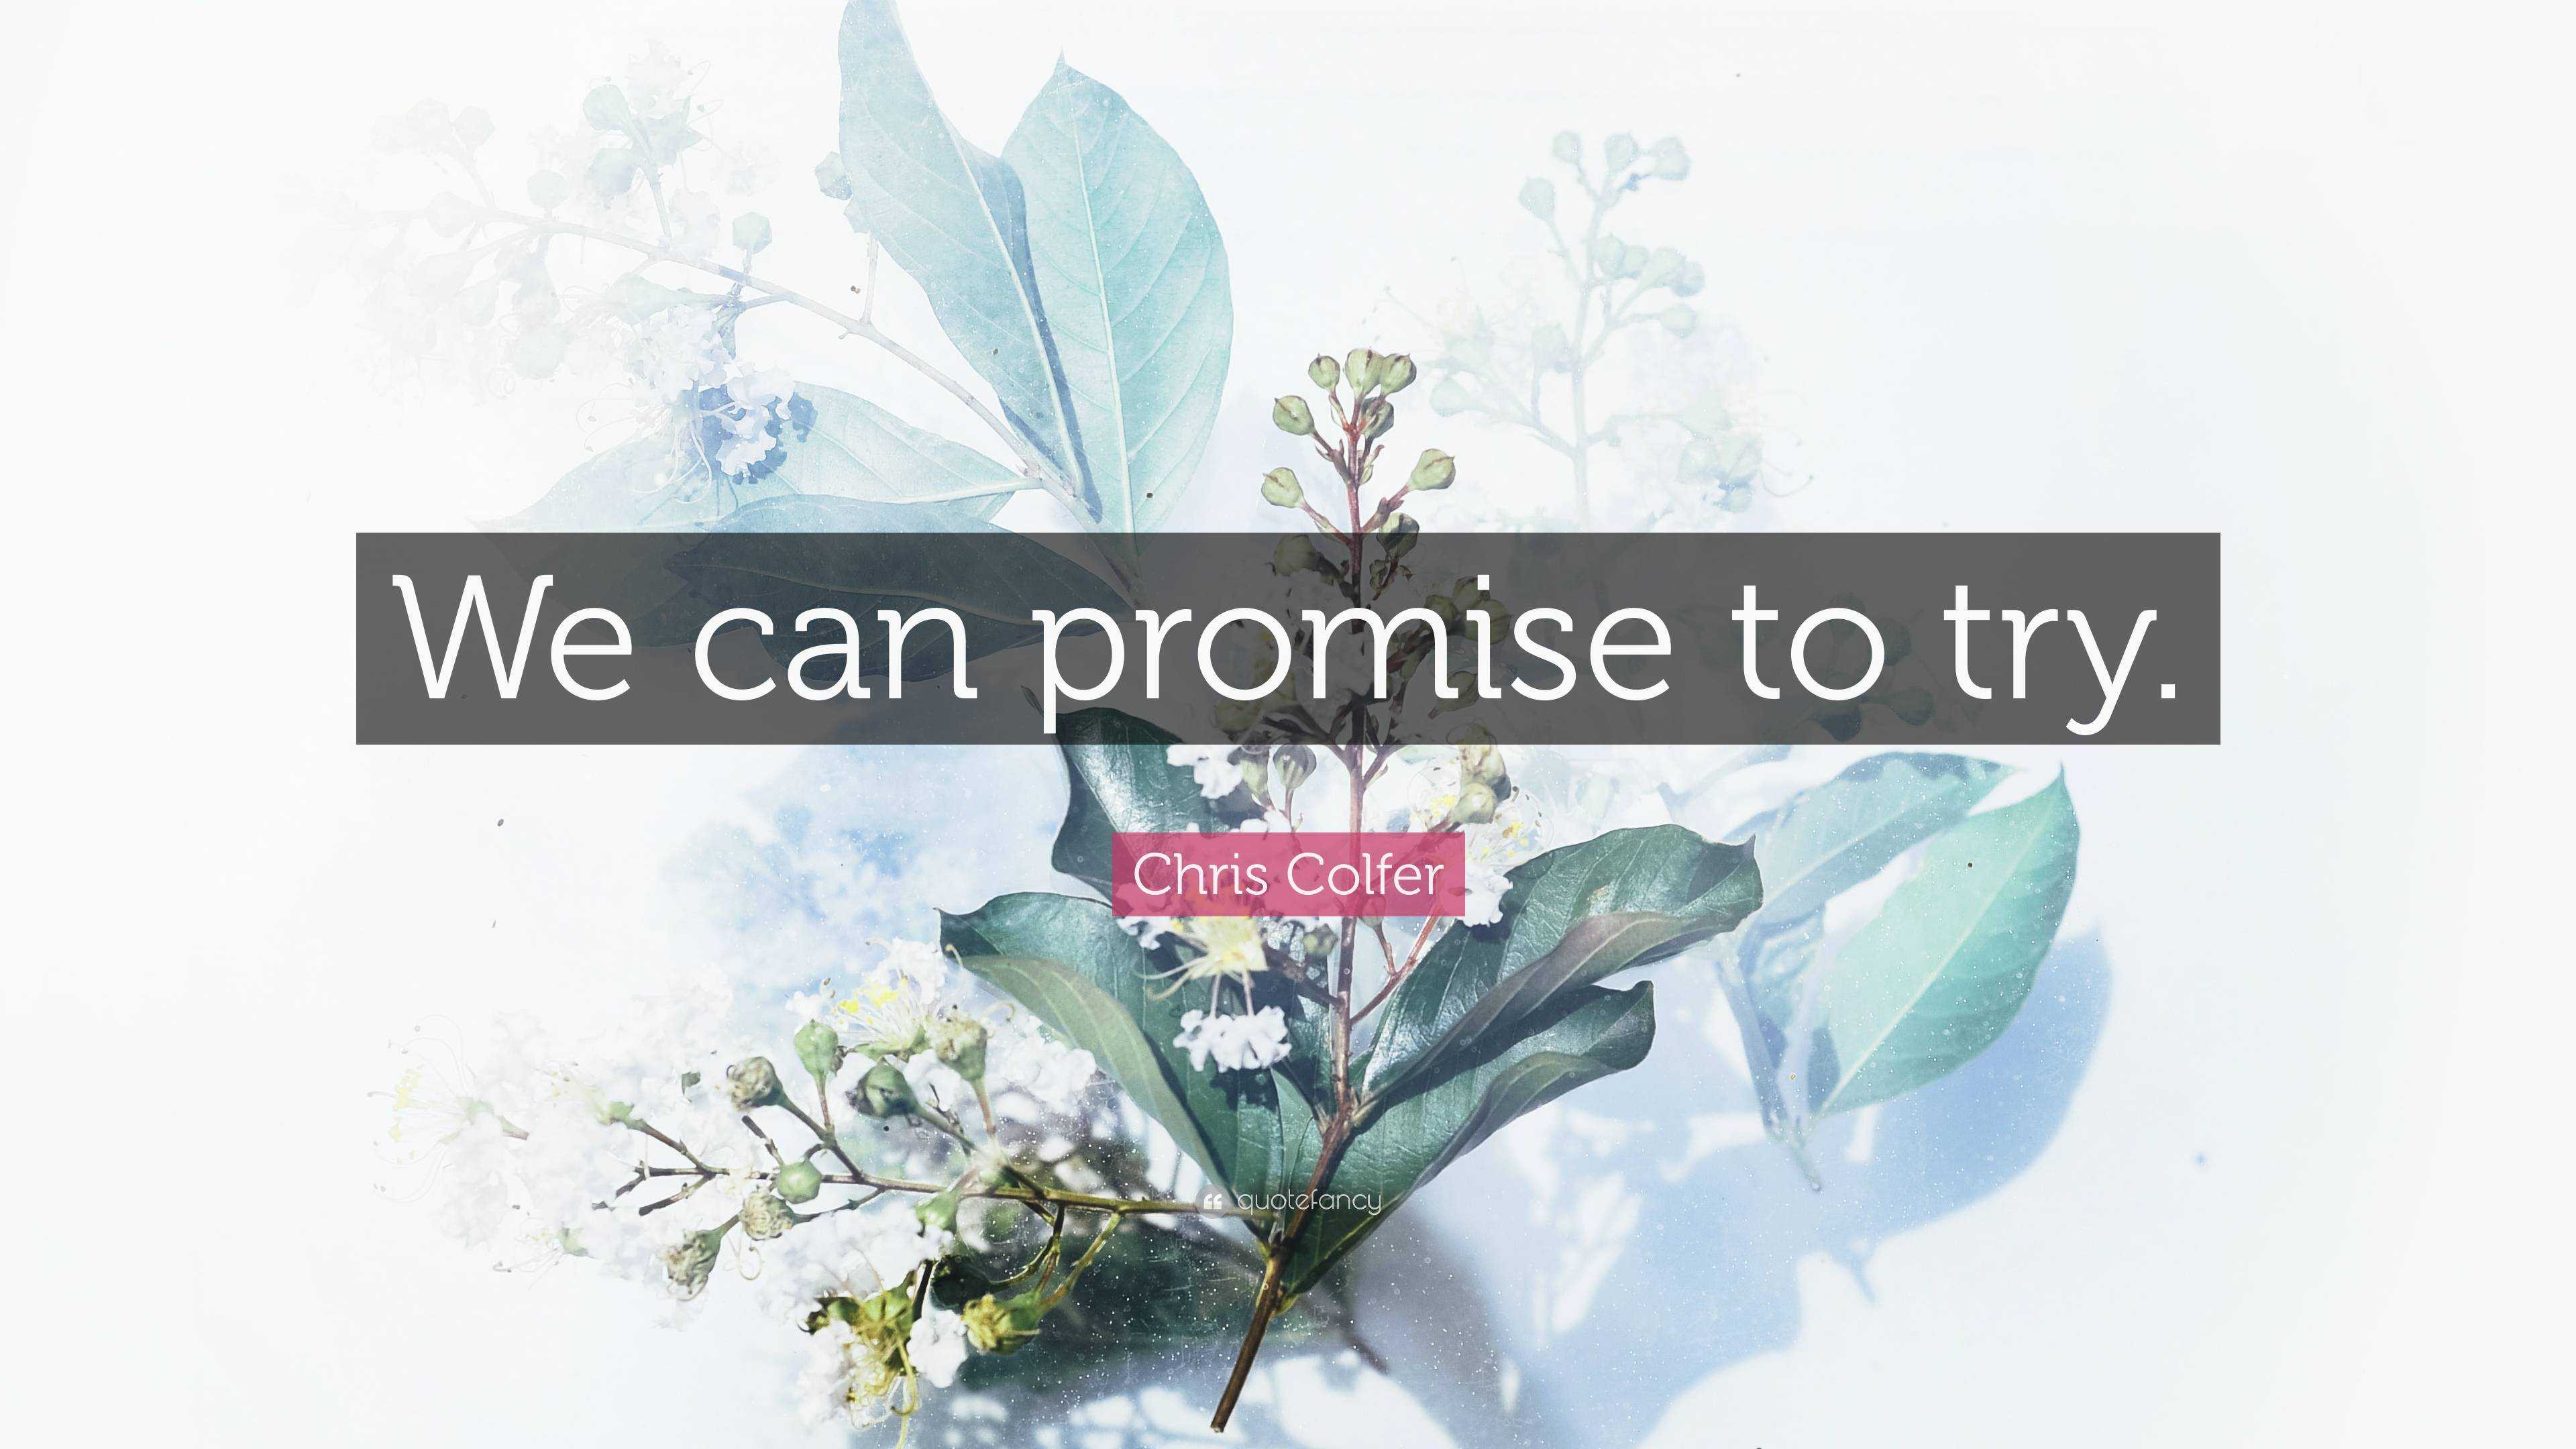 Chris Colfer Quote: “We can promise to try.”